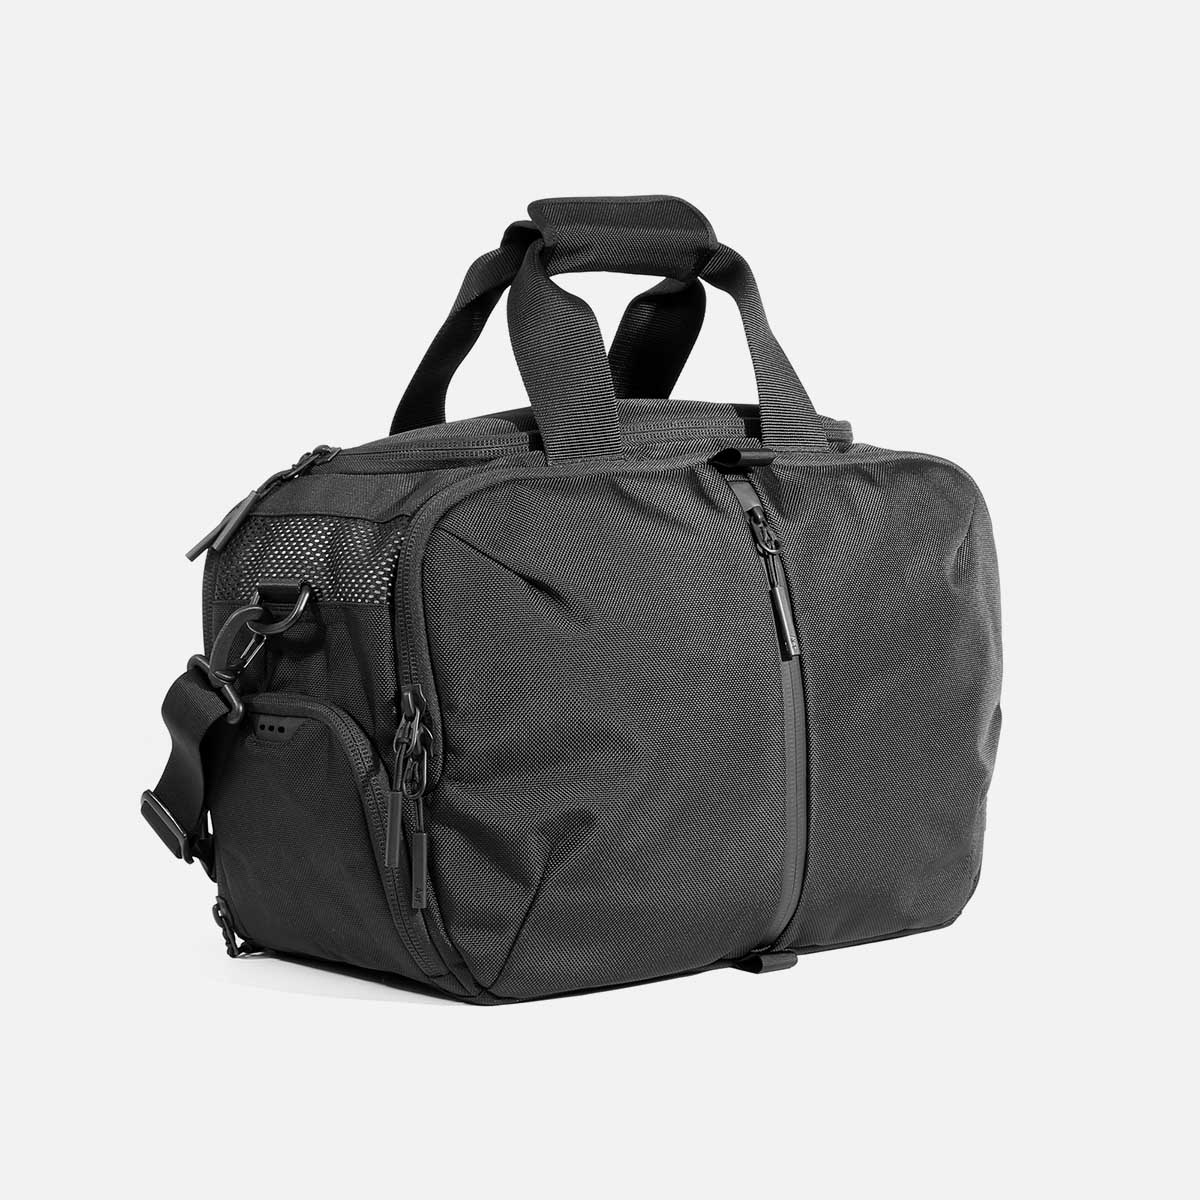 Gym Duffle 3 Black | Aer ｜ エアー公式通販サイト